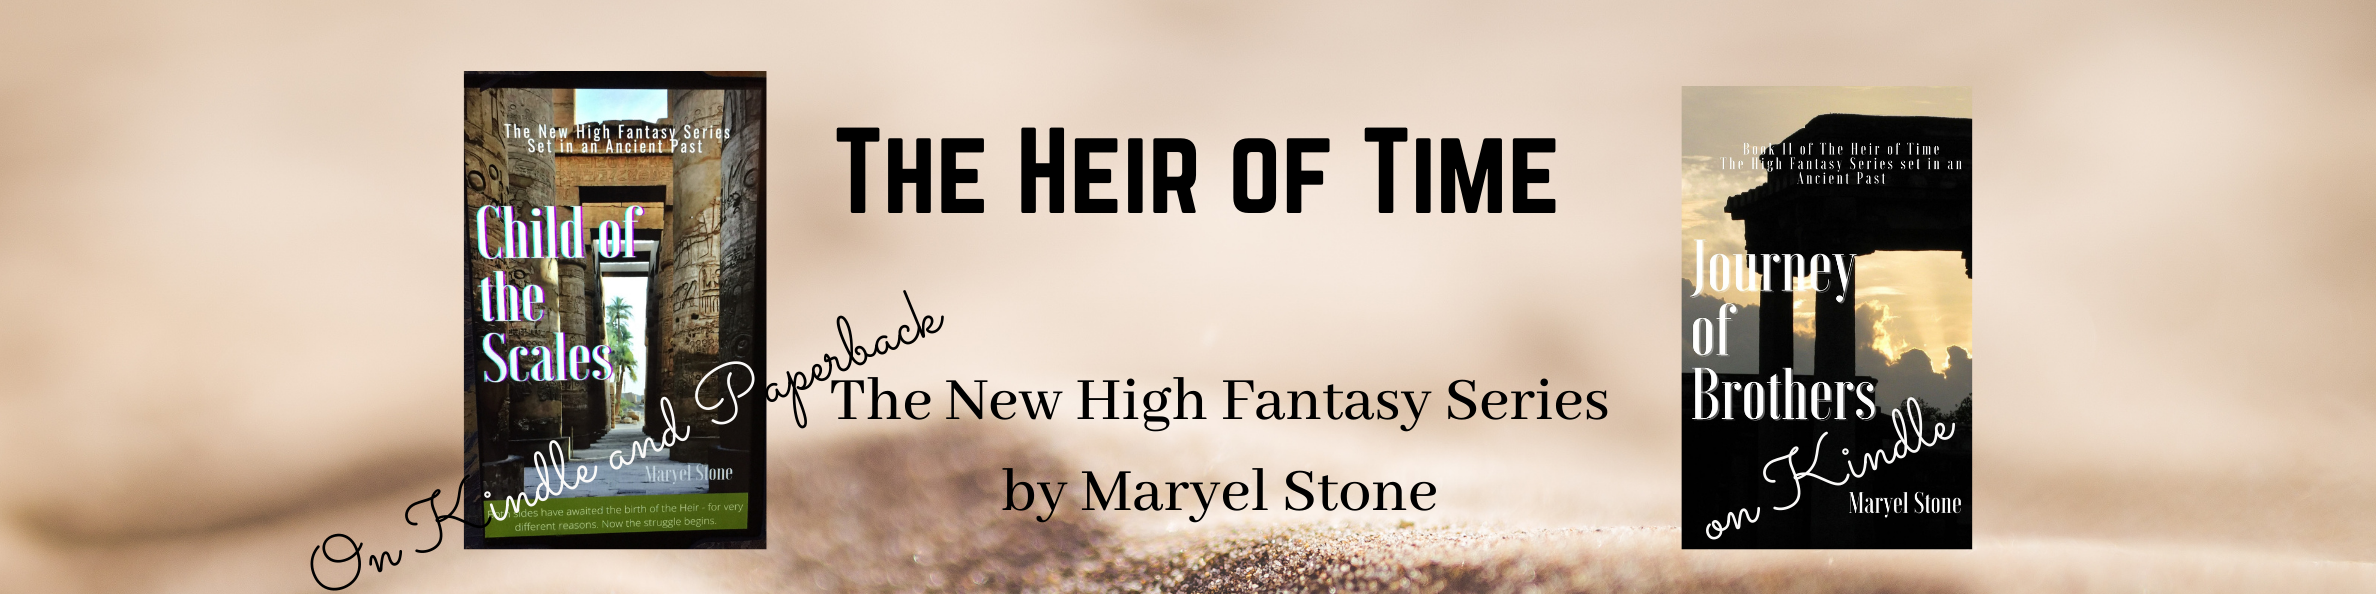 The Heir of Time Twitter banner (2).png